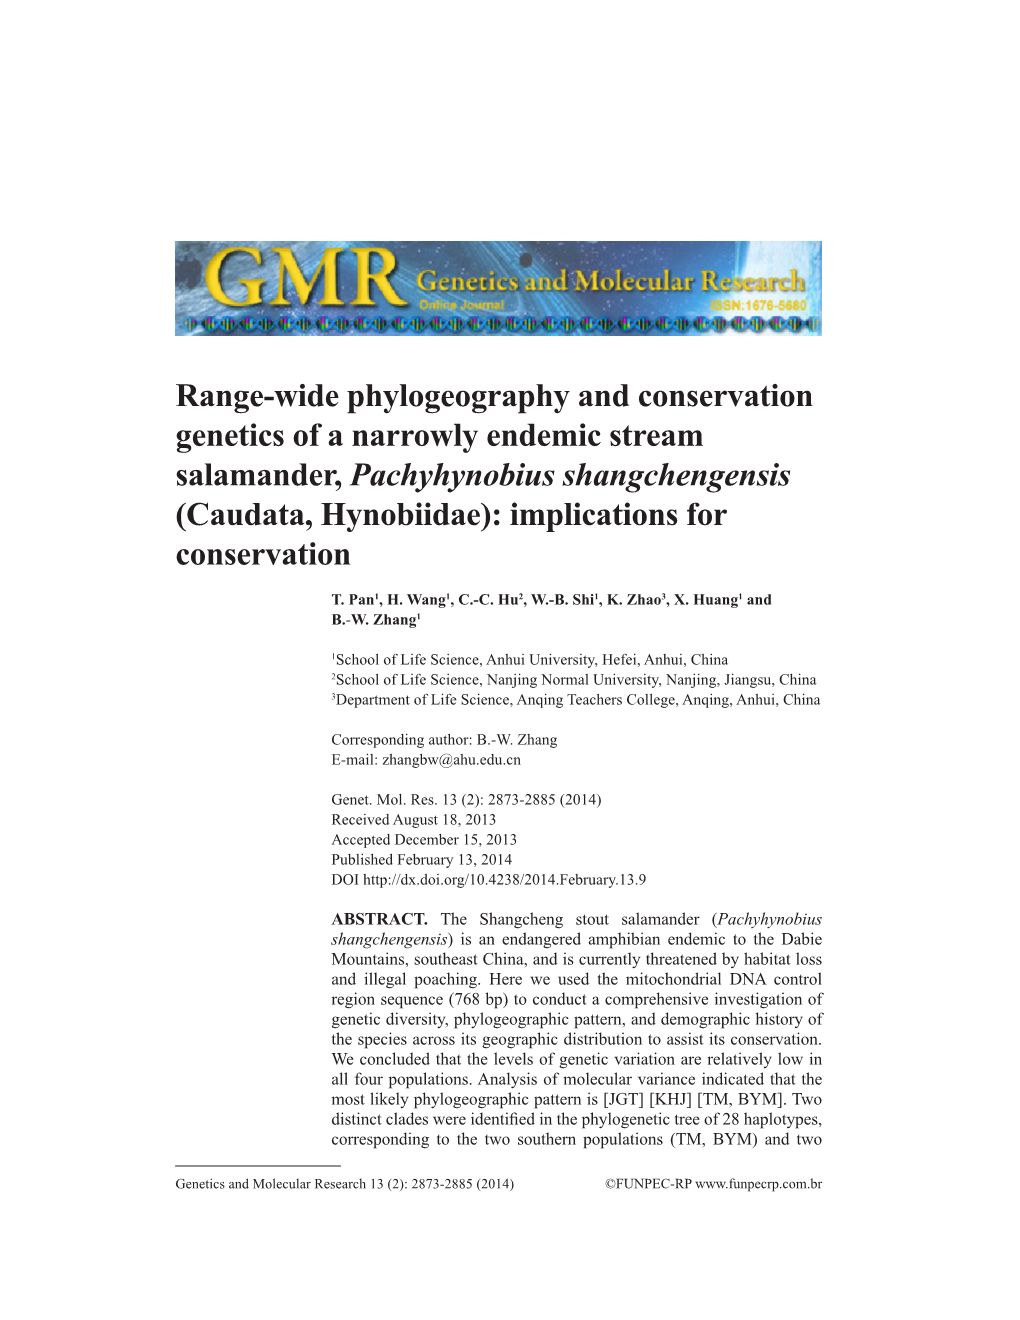 Range-Wide Phylogeography and Conservation Genetics